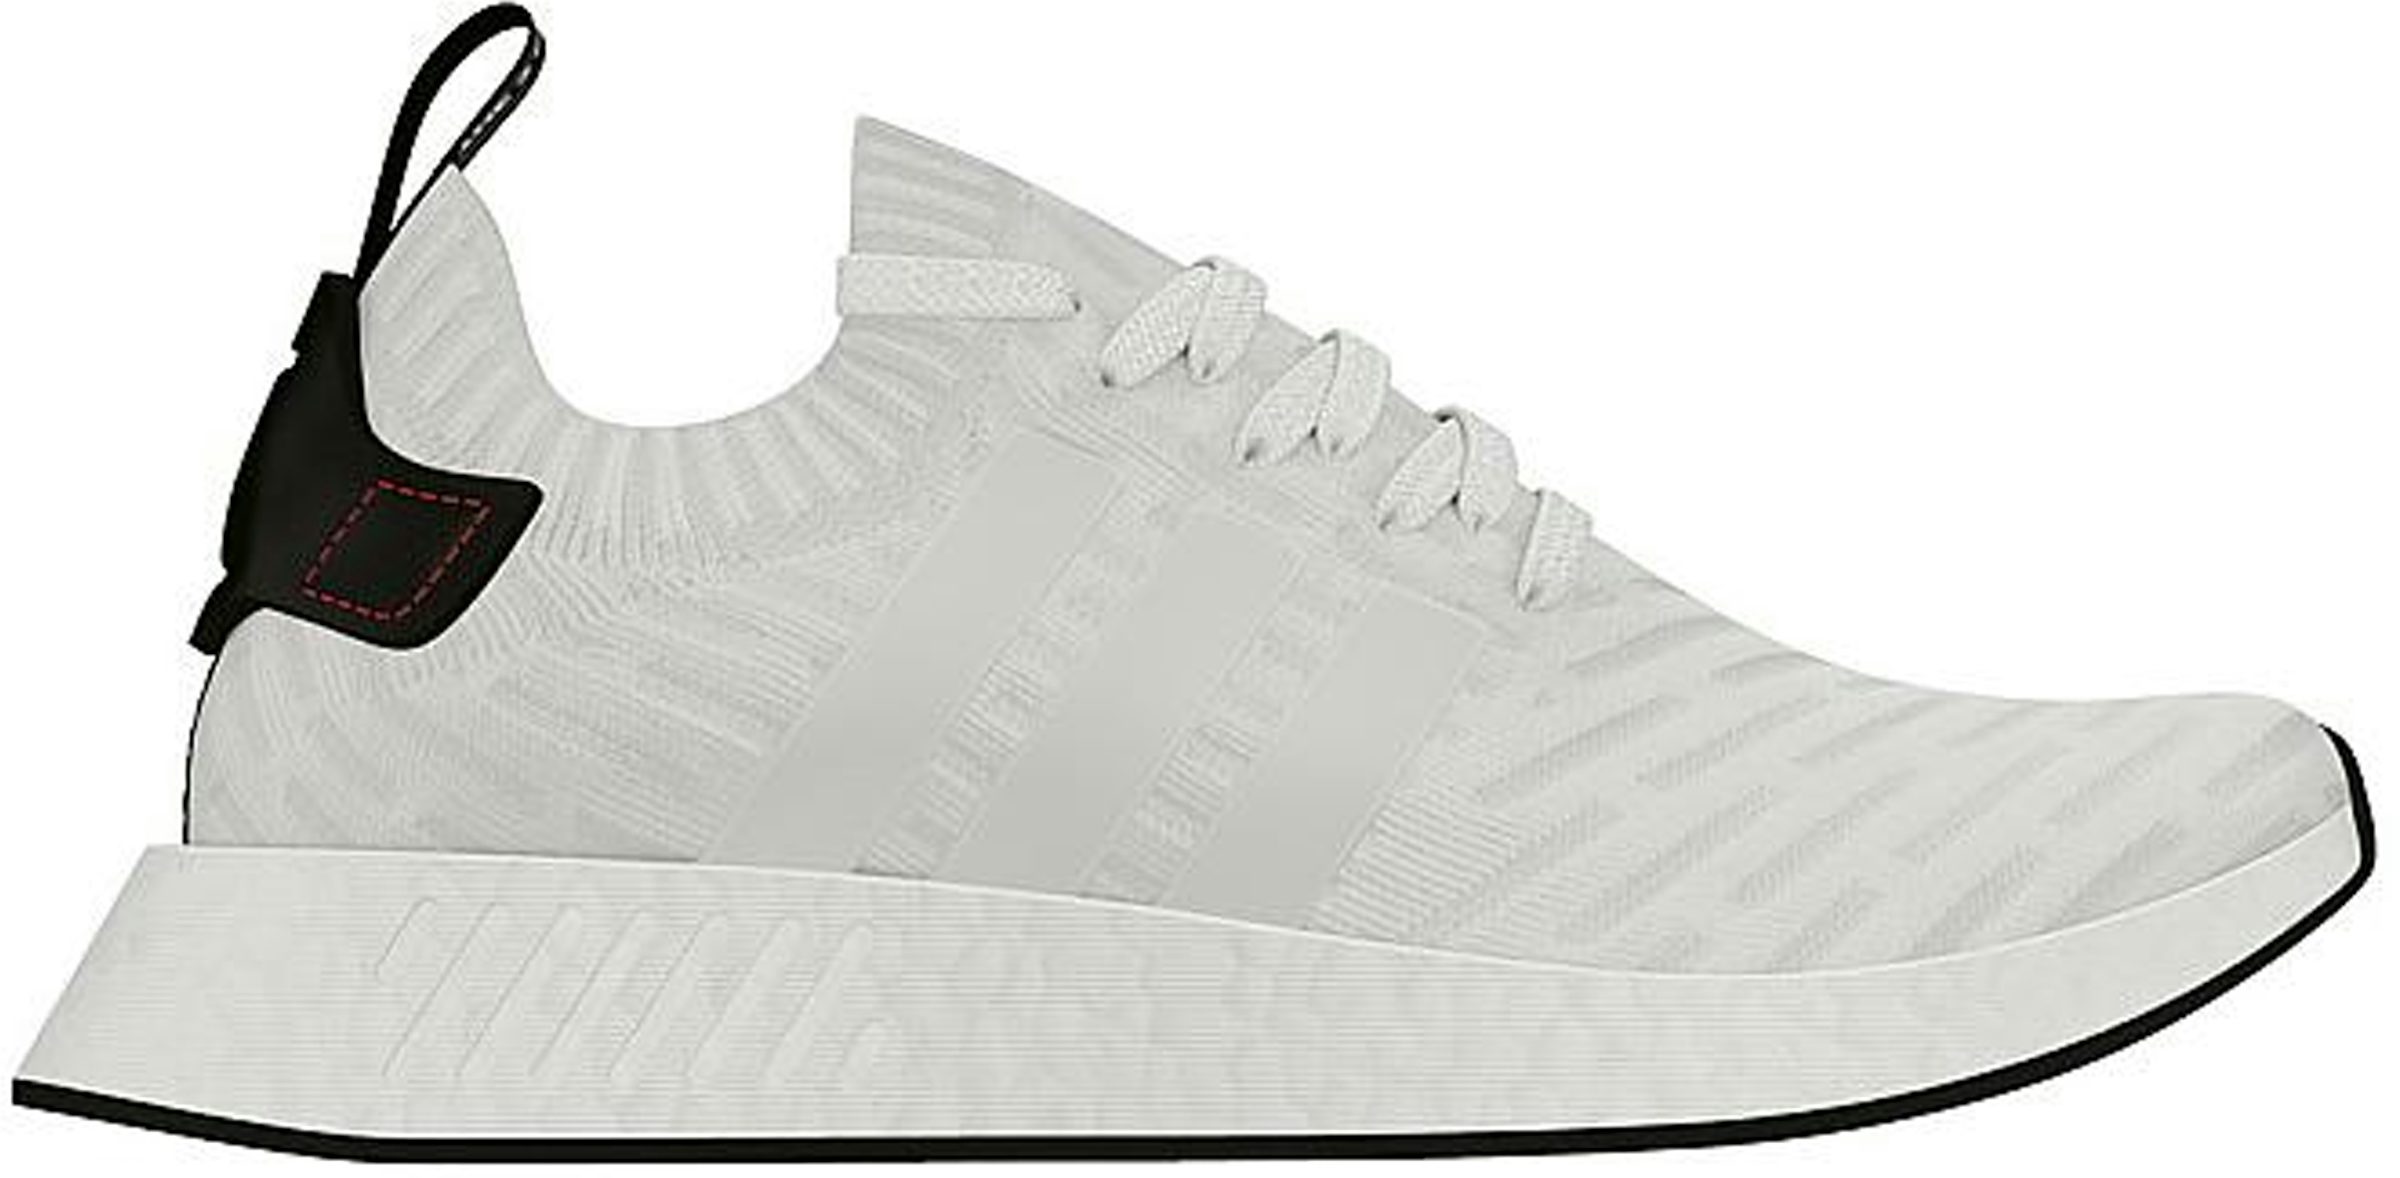 adidas NMD White Black Men's - BY3015 - US